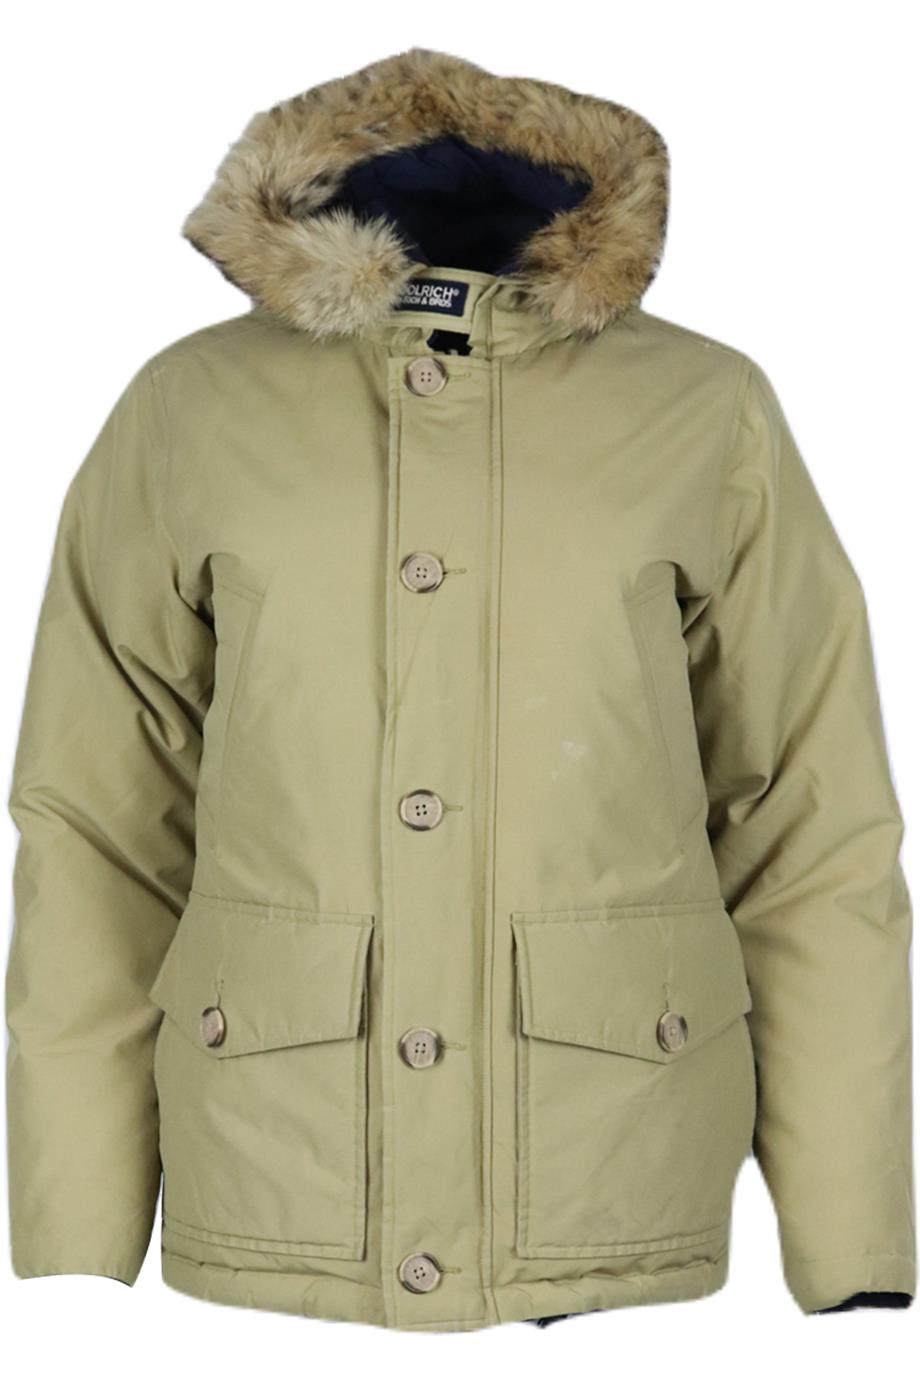 WOOLRICH HOODED REVERSIBLE FUR TRIMMED QUILTED SHELL DOWN JACKET SMALL